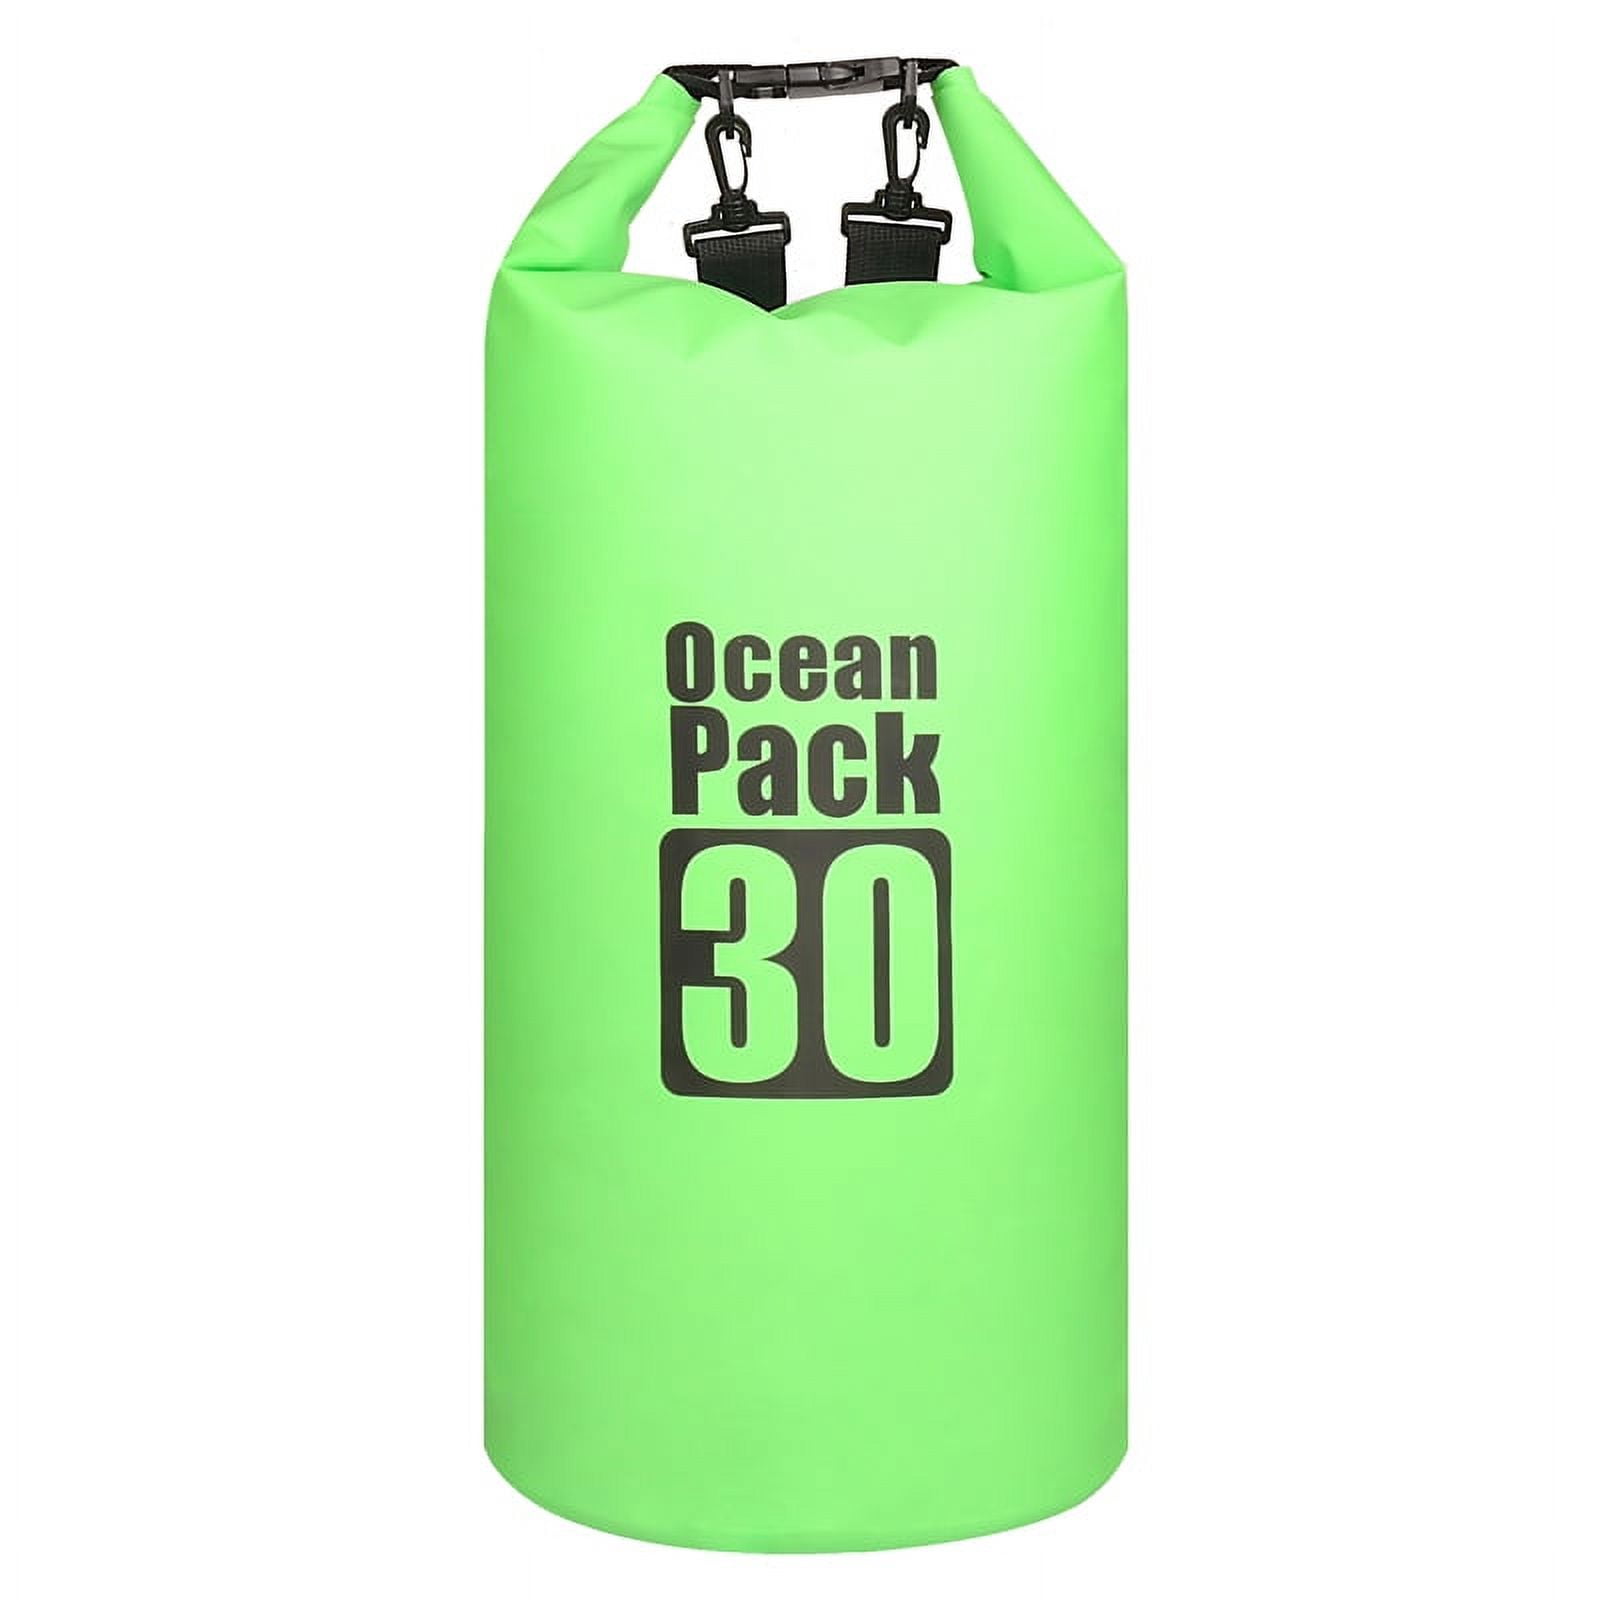 Waterproof Dry Bag for Women Men, 30L, Roll Top Lightweight Dry Storage Bag  Backpack with Phone Case for Travel, Swimming, Boating, Kayaking, Camping  and Beach 